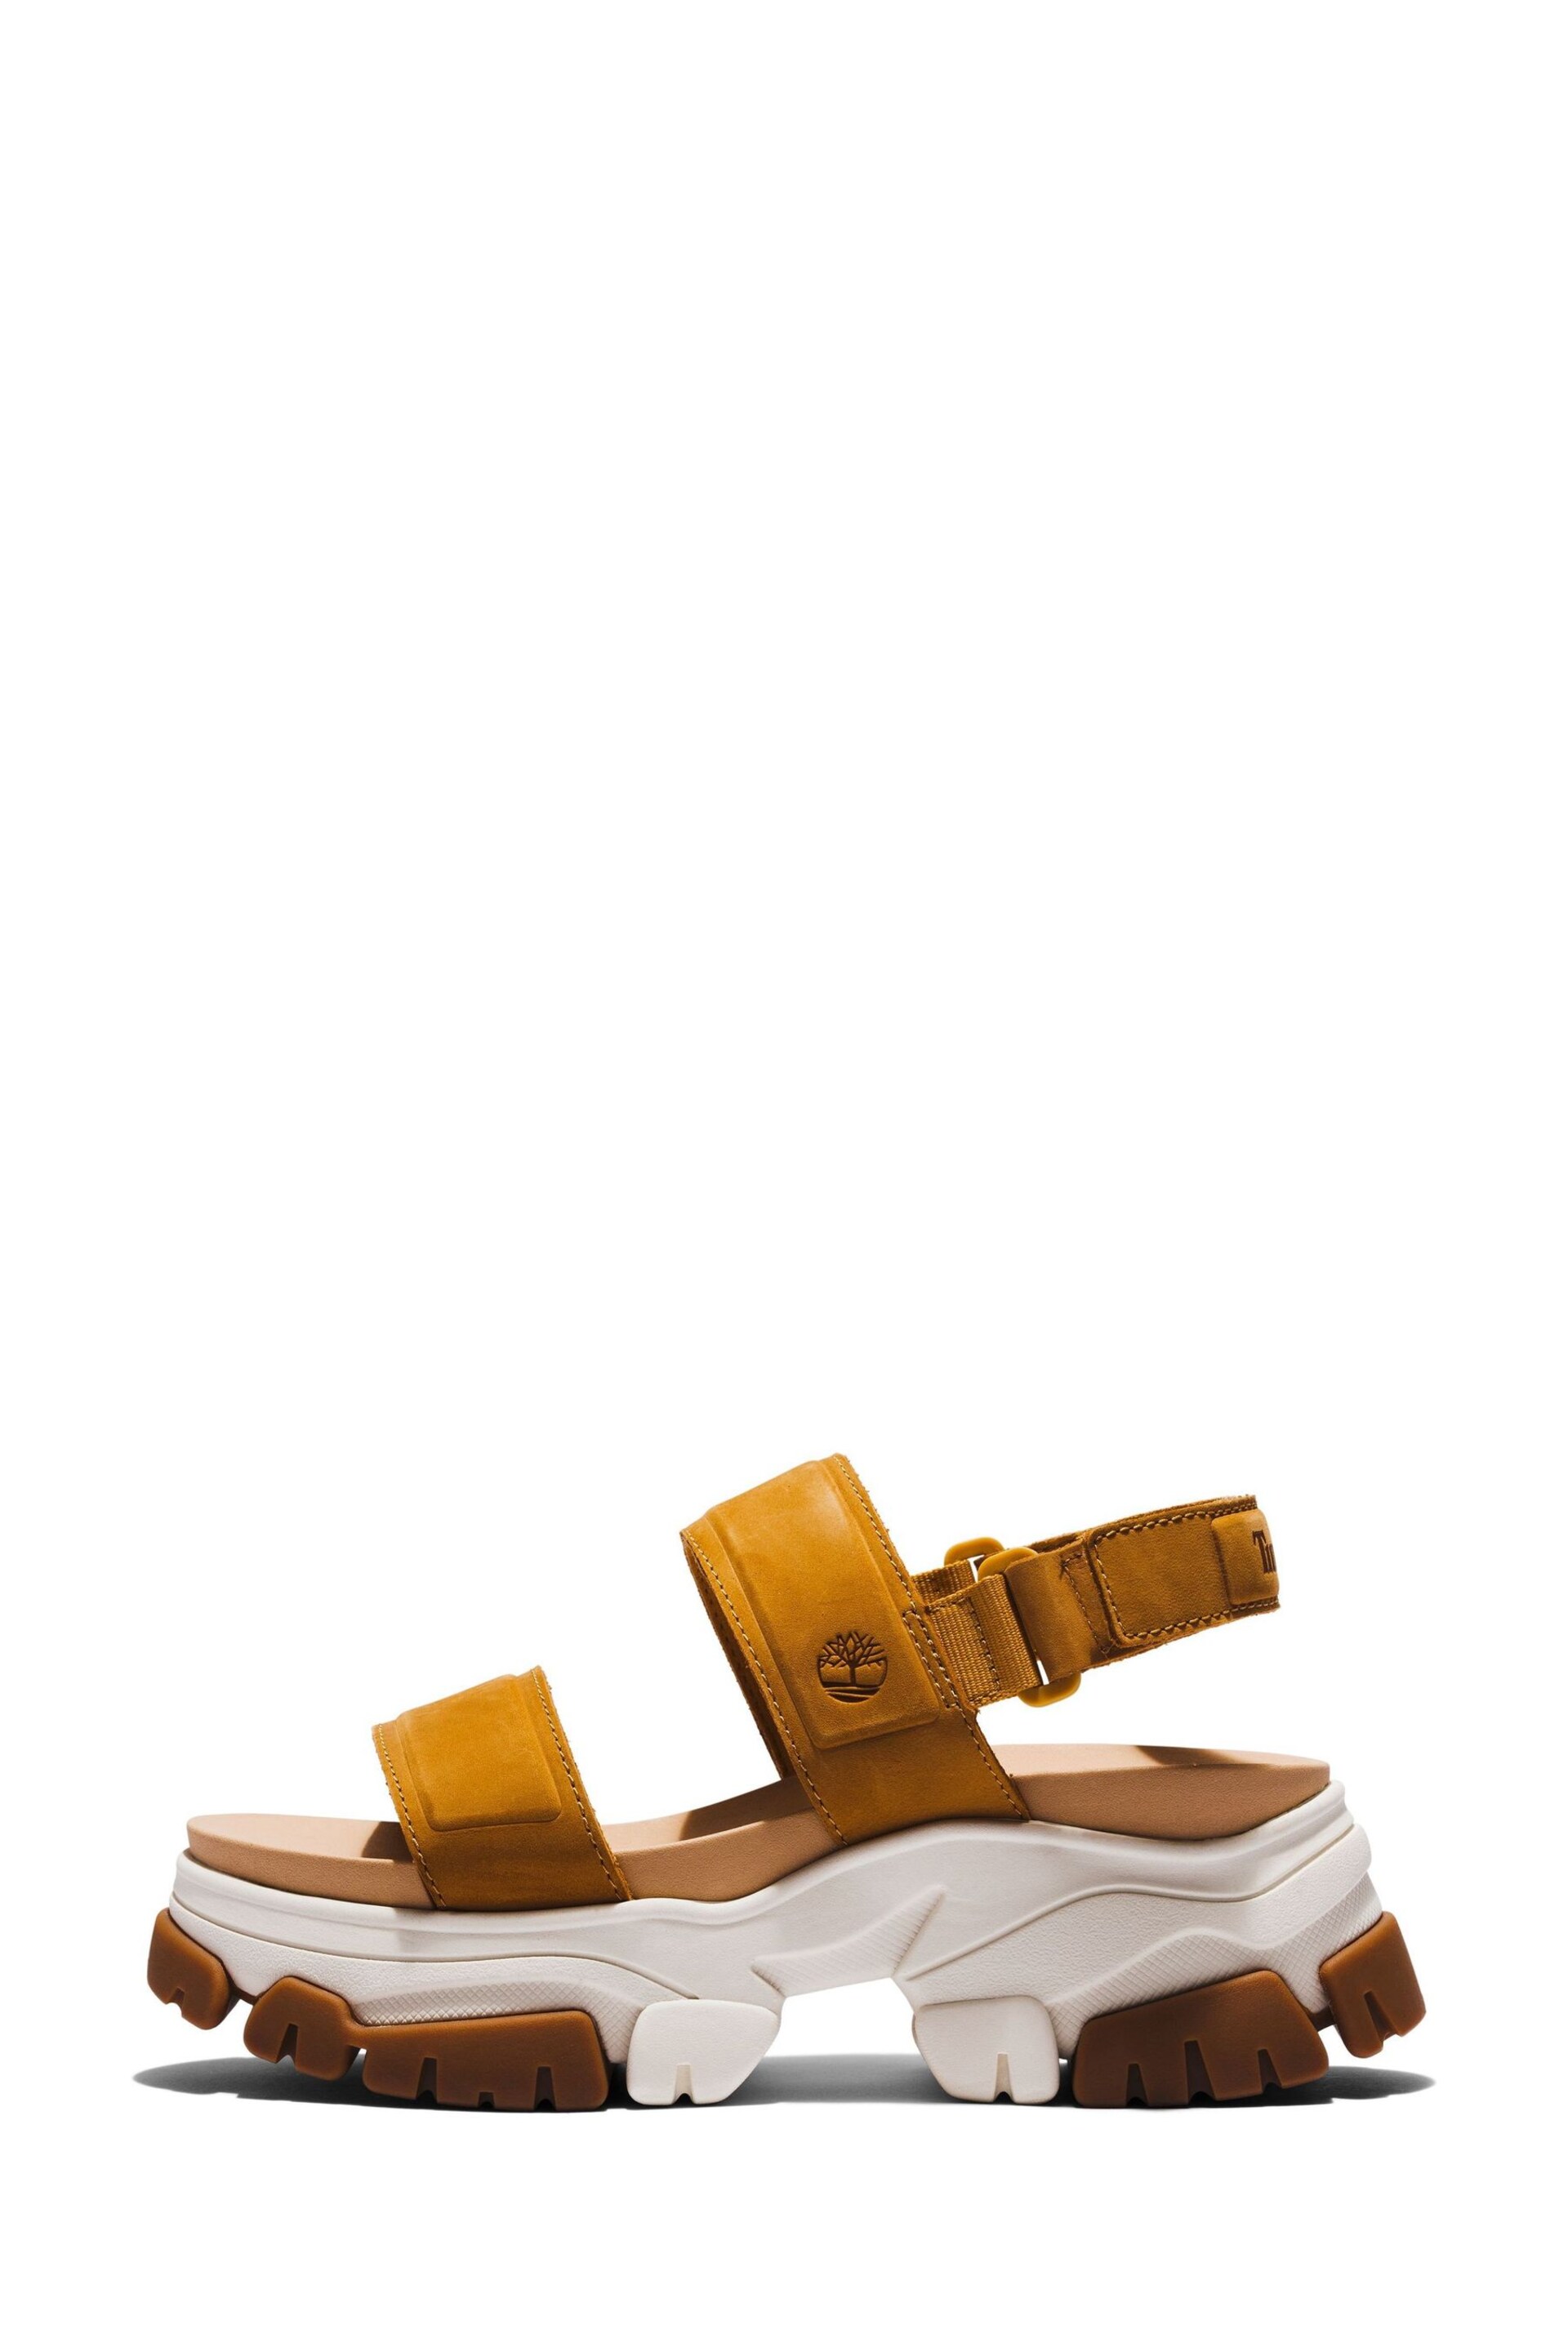 Timberland Yellow Adley Way Sandals - Image 2 of 9